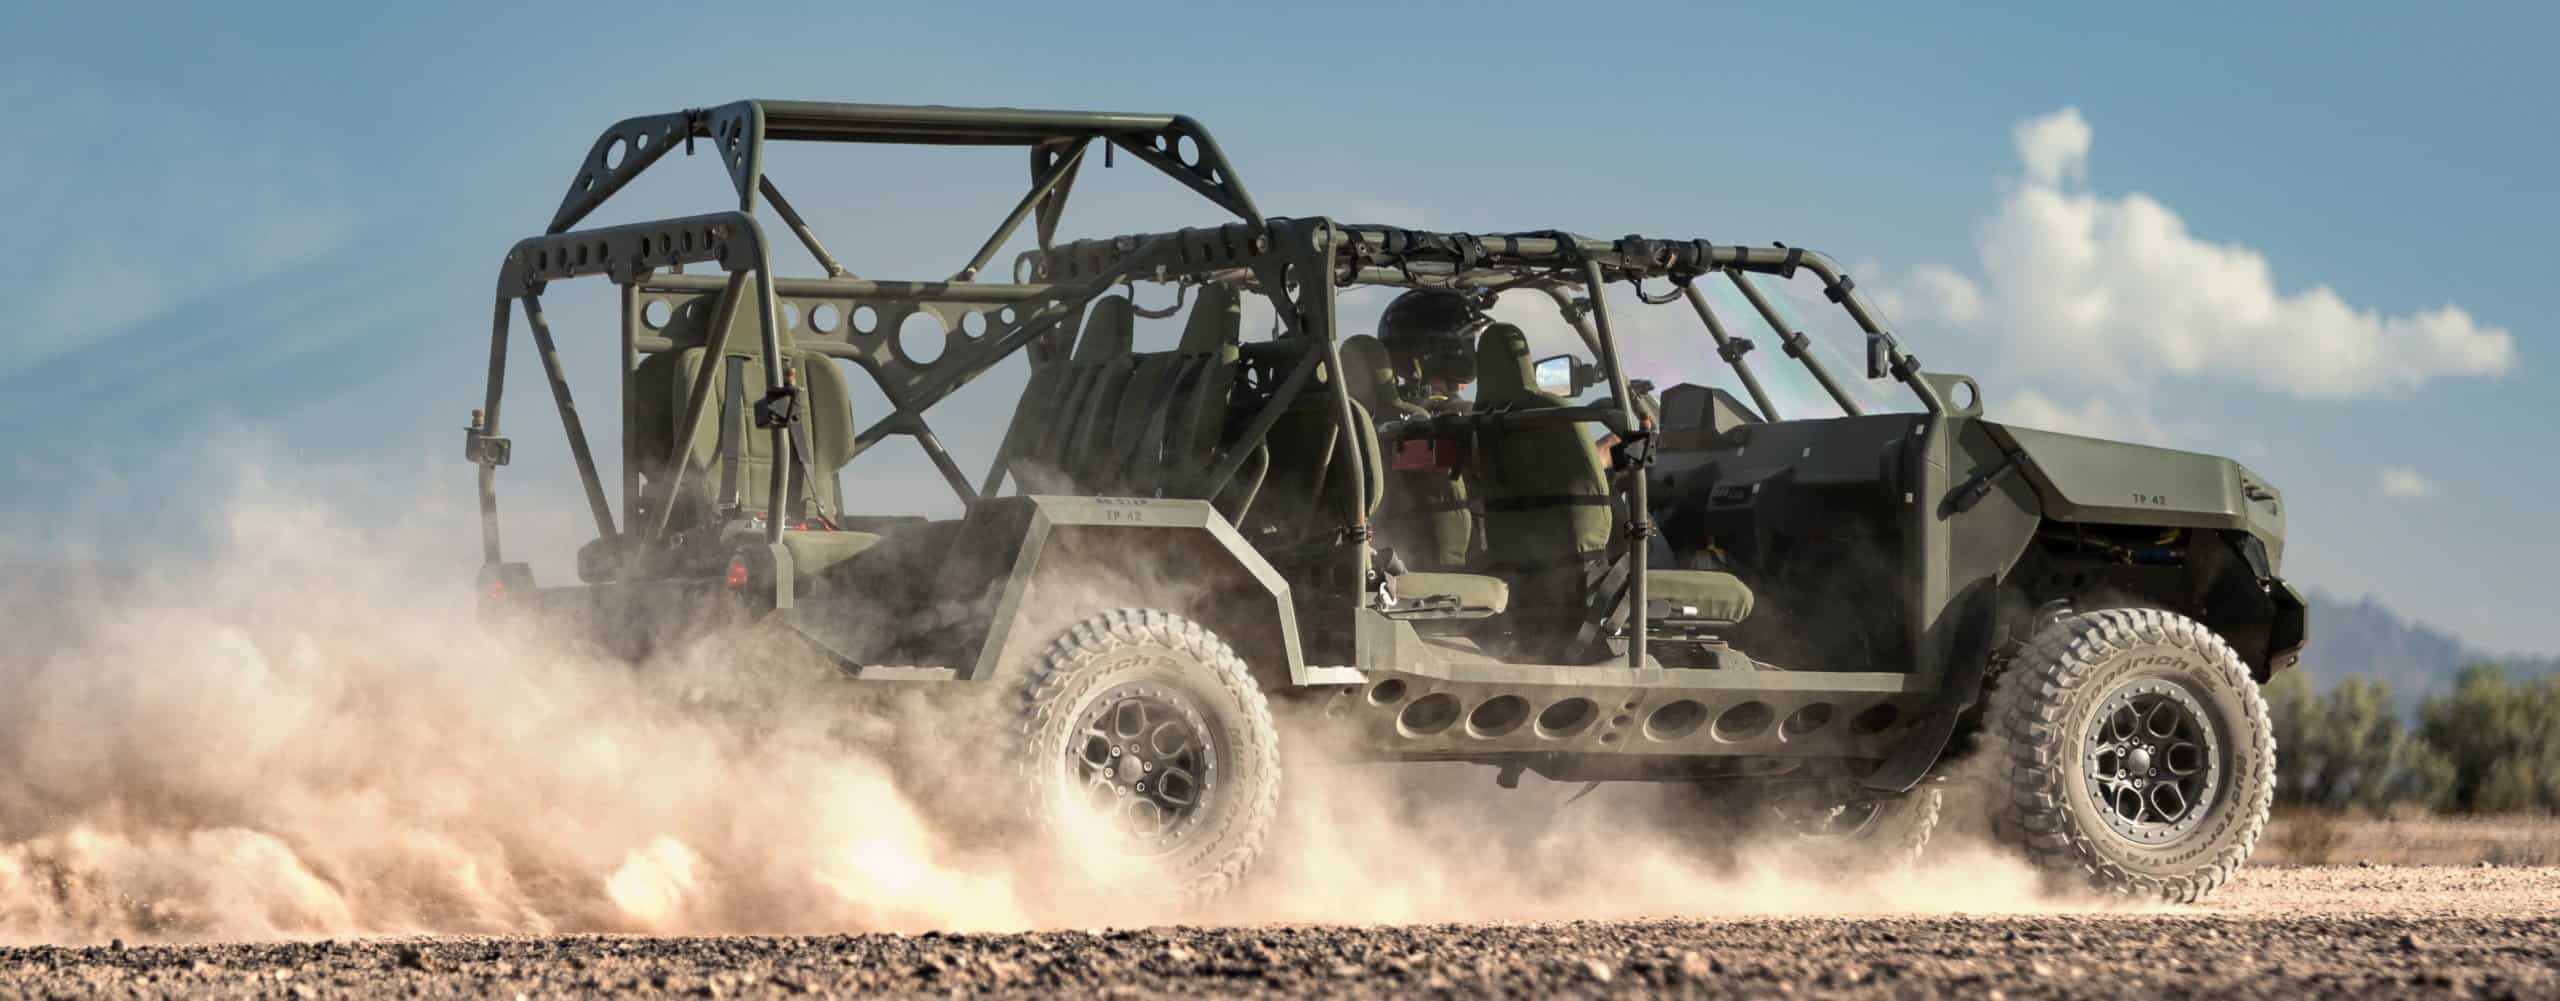 Army vehicles, GM will build Army vehicles based on Colorado ZR2 pickup platform, ClassicCars.com Journal